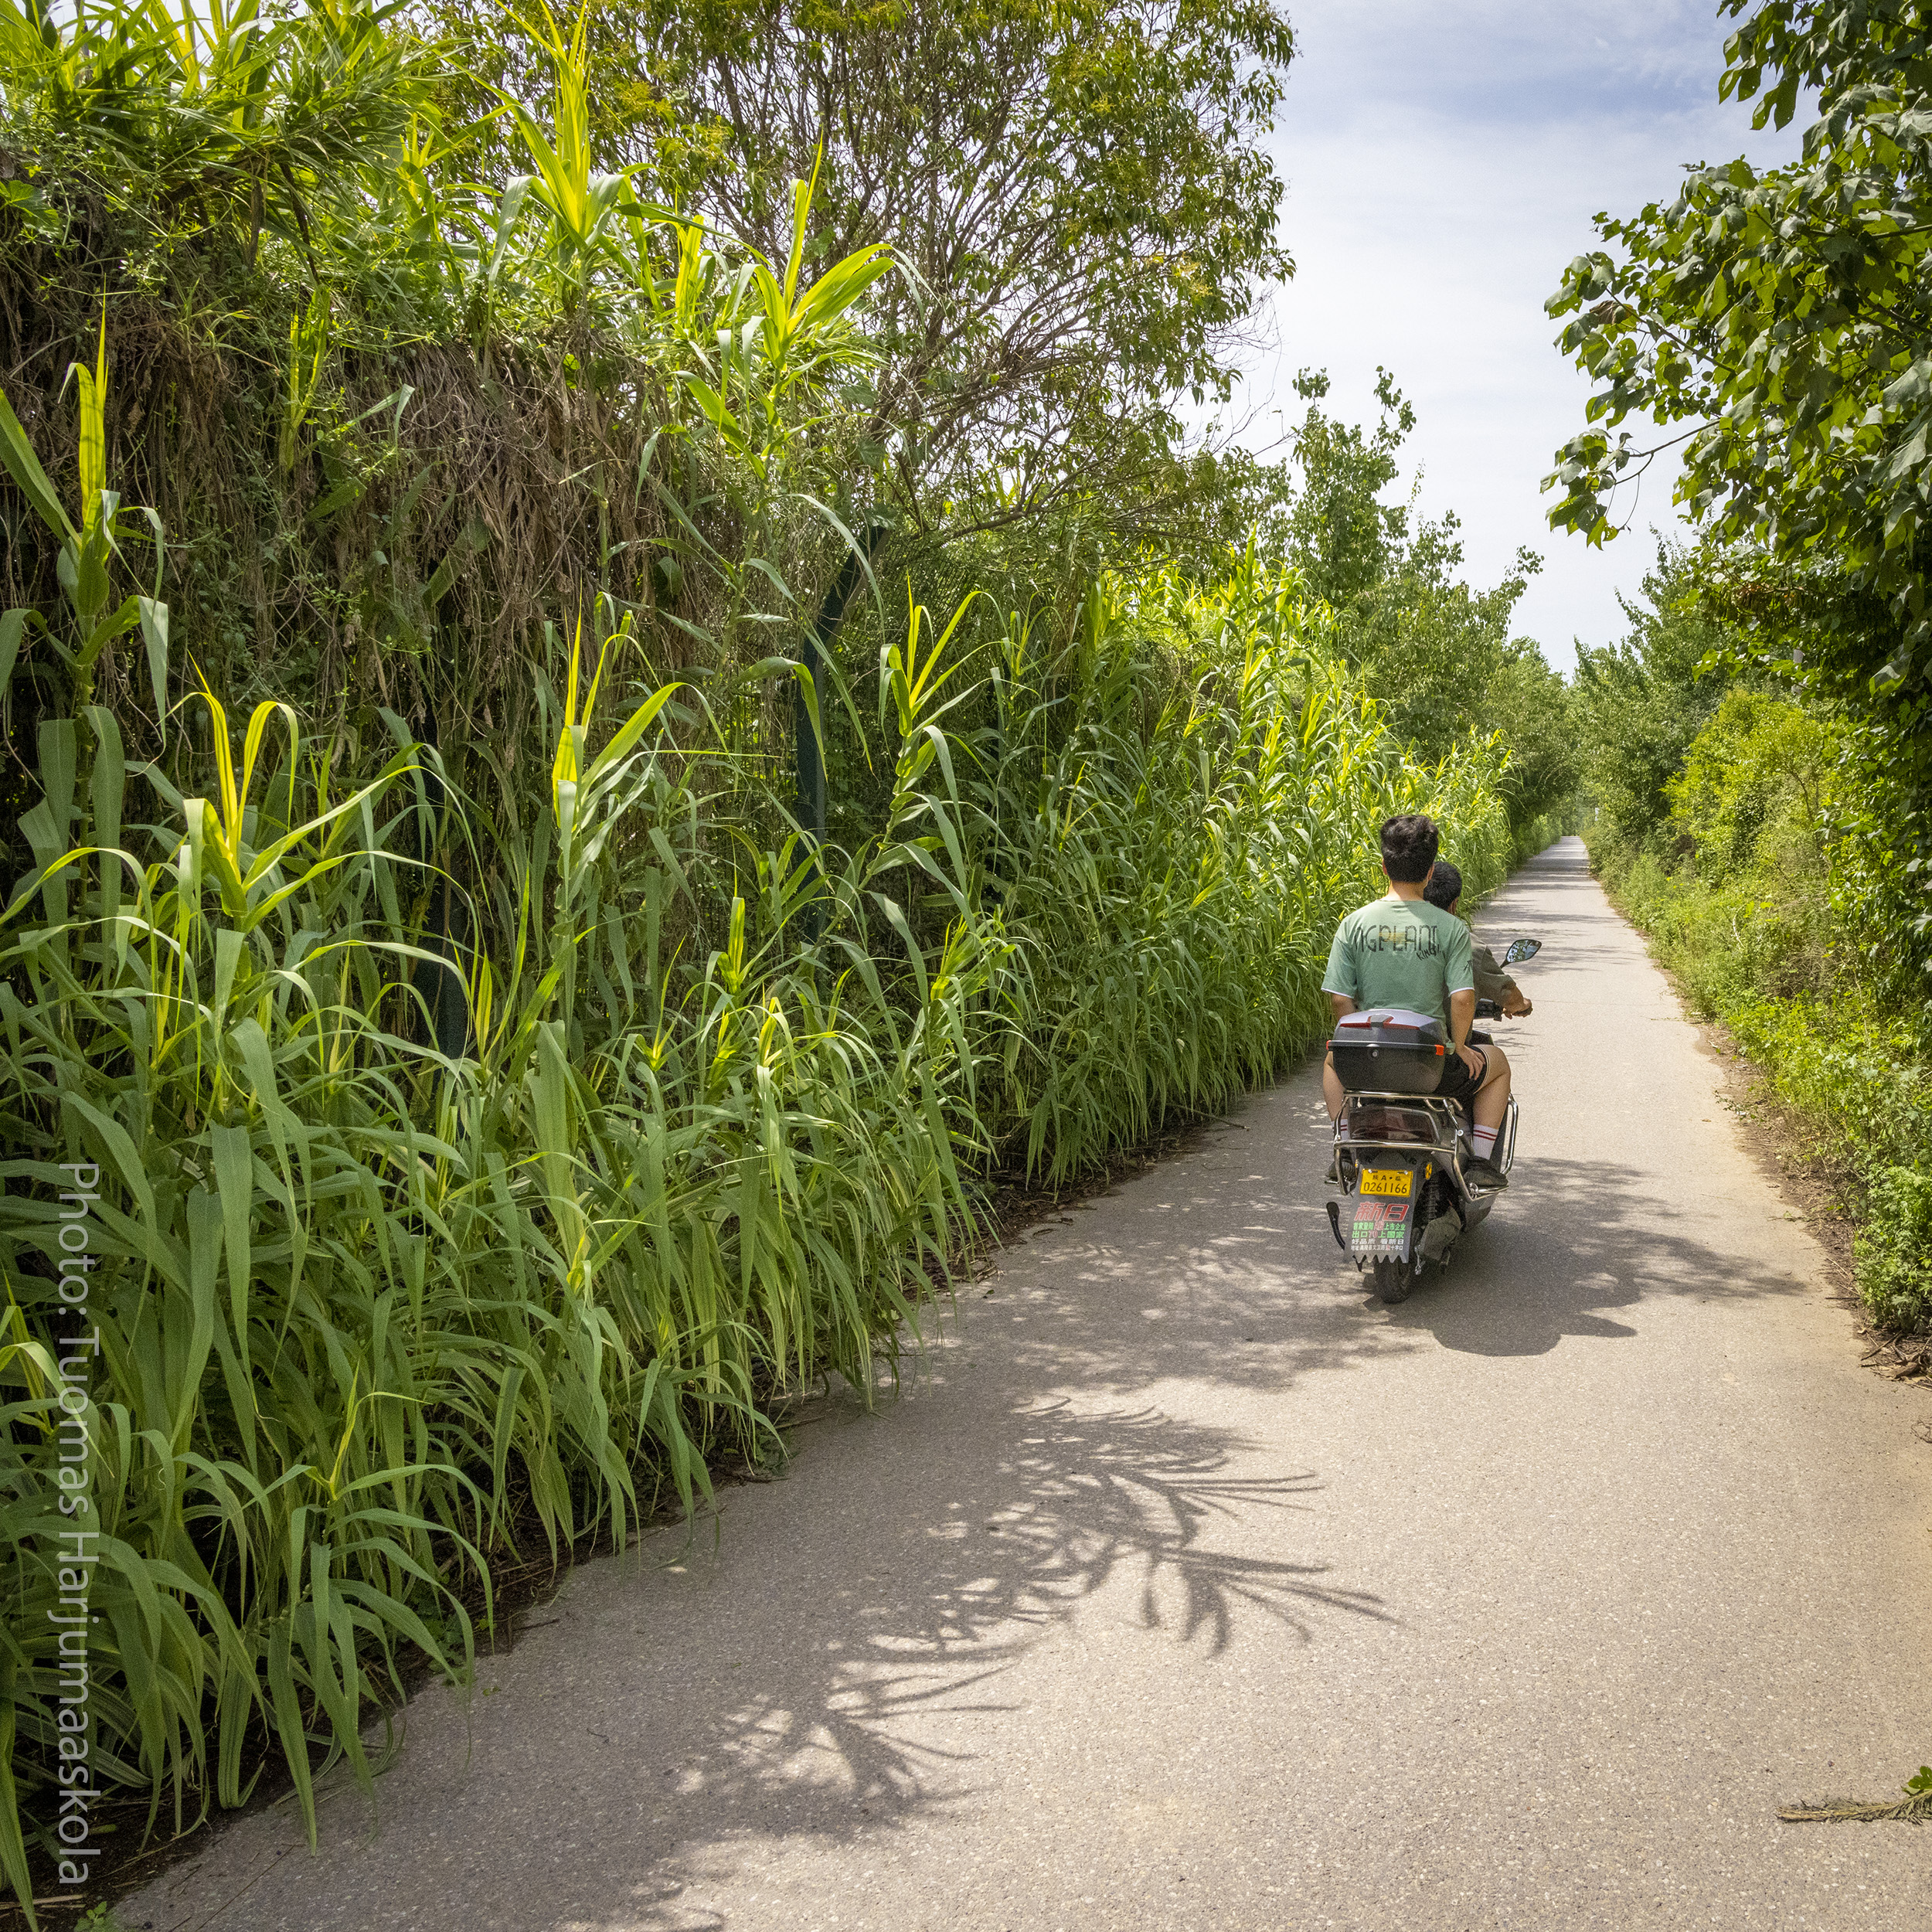 Men passing by on a scooter moped on a Chinese countryside road surrounded by green vegetation. Photographer Tuomas Harjumaaskola.